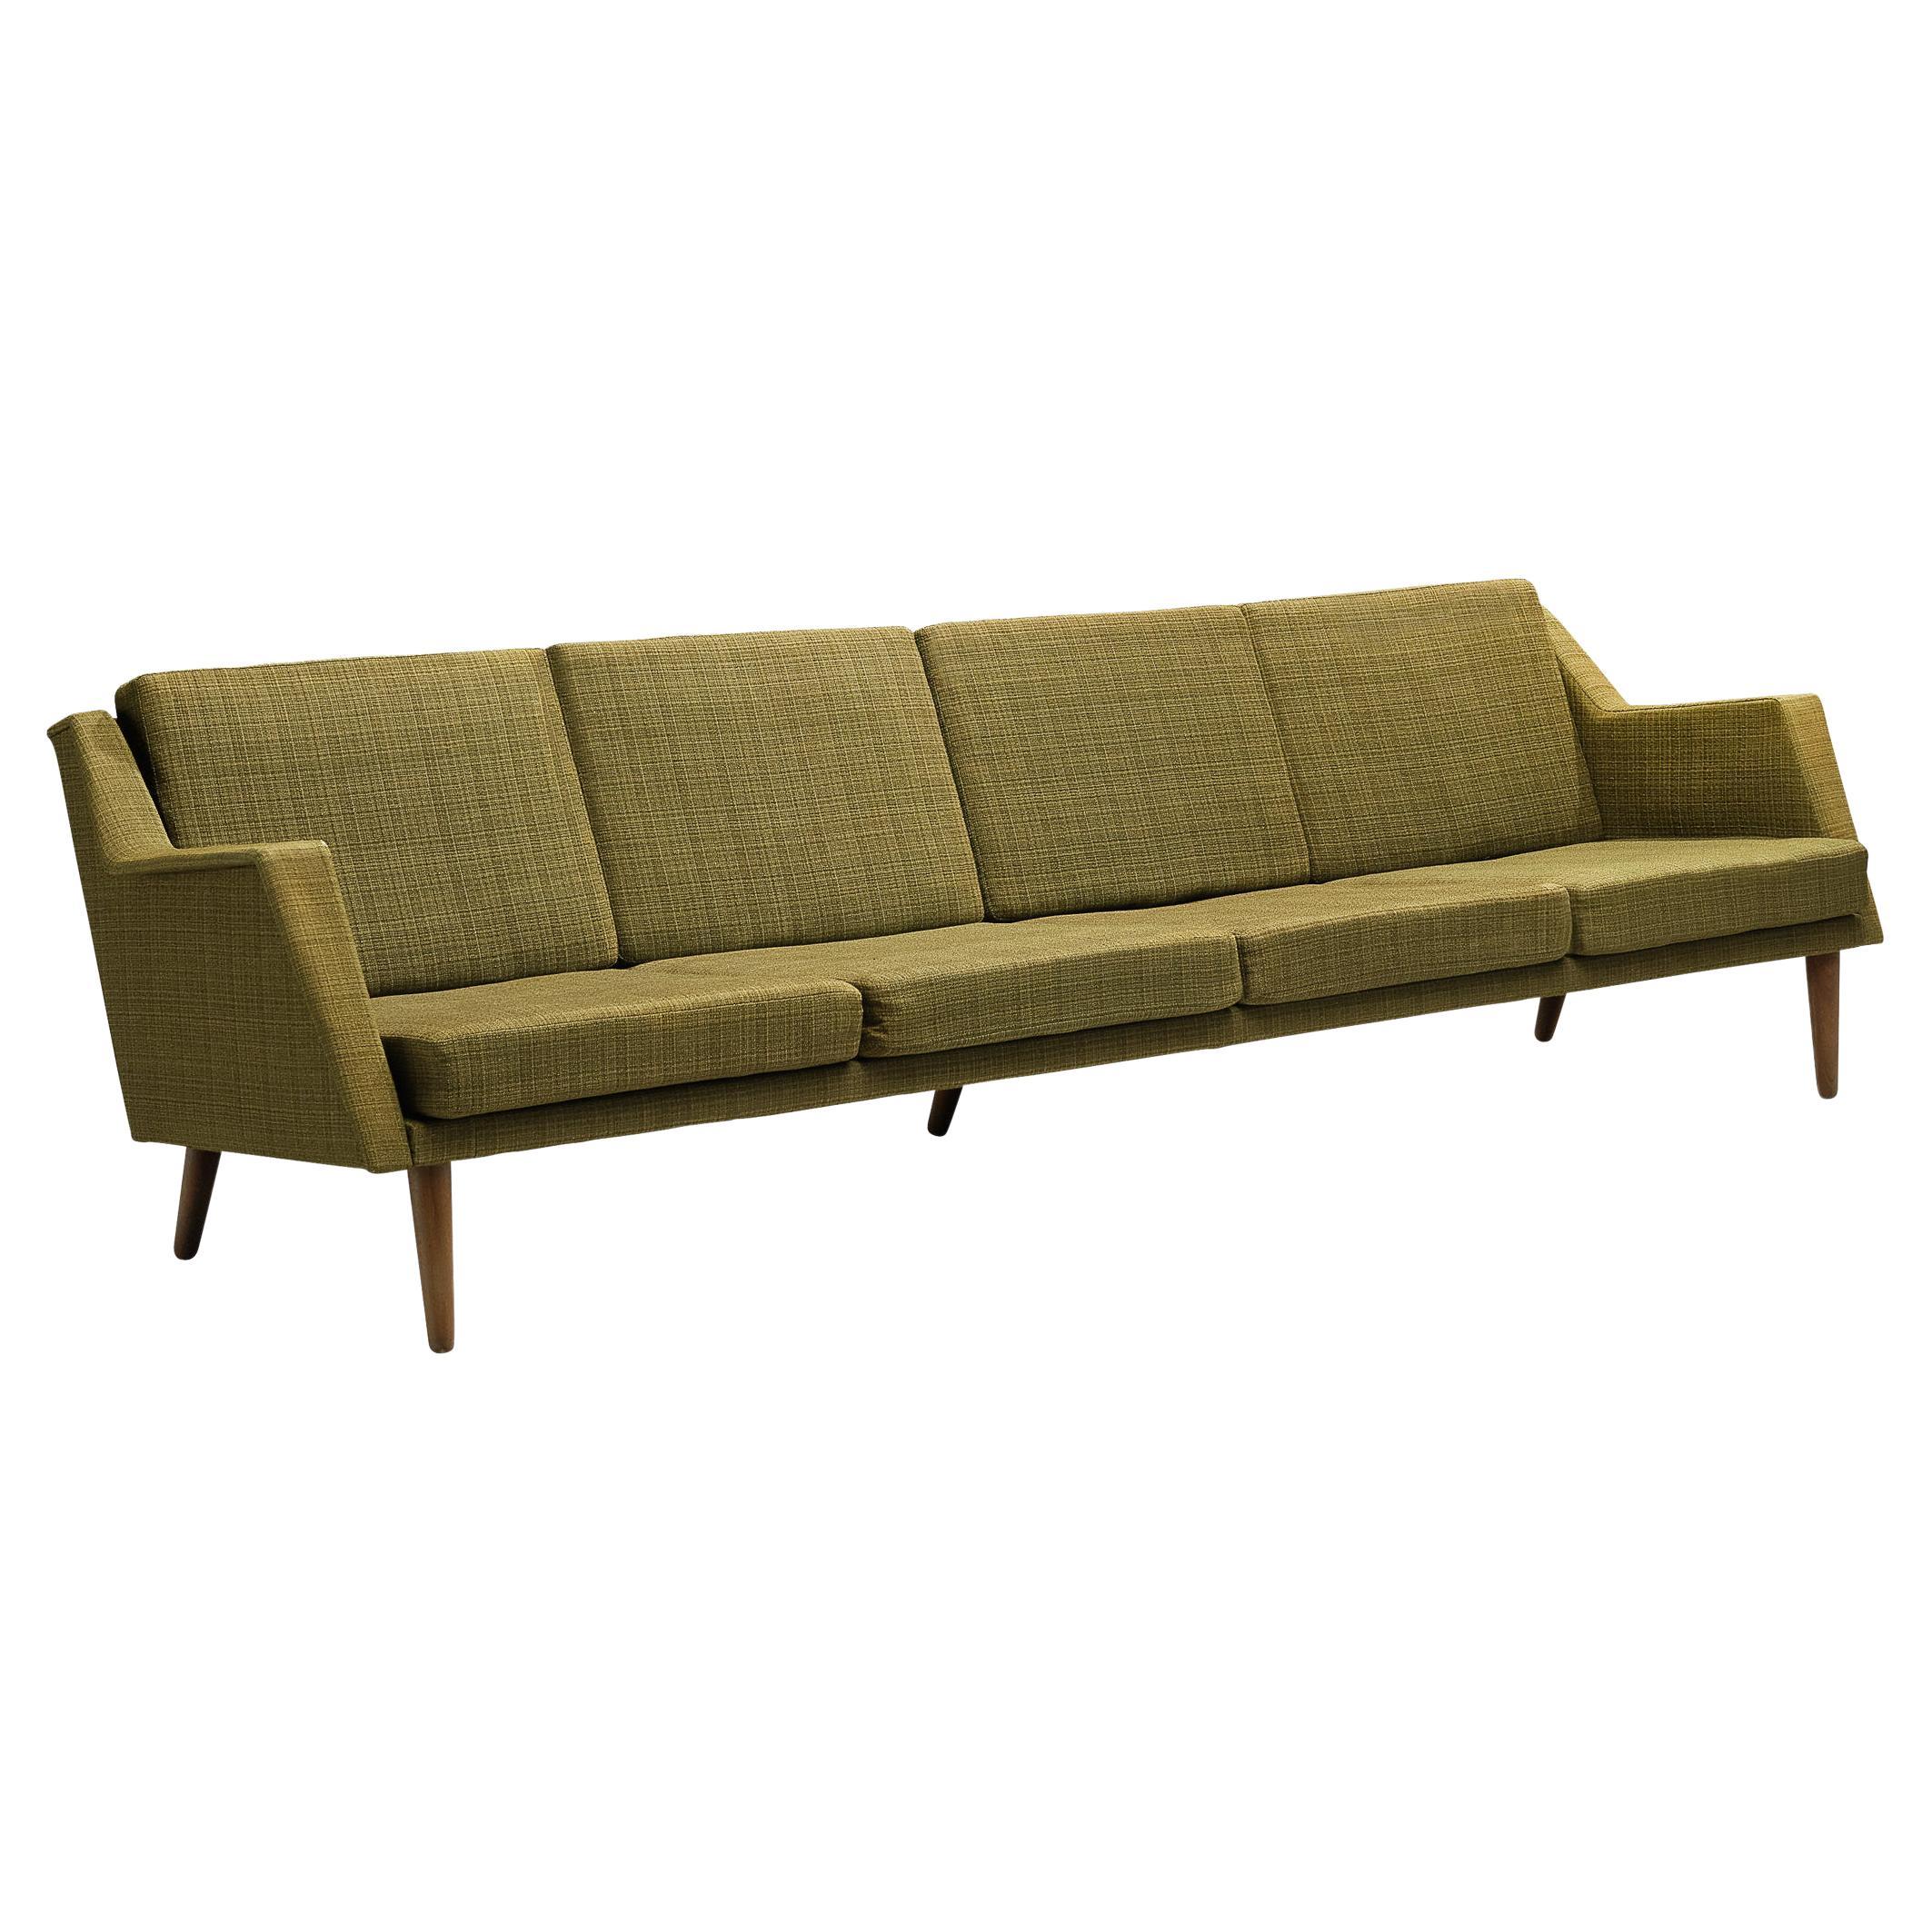 Danish Four Seat Sofa in Teak and Olive Green Upholstery For Sale